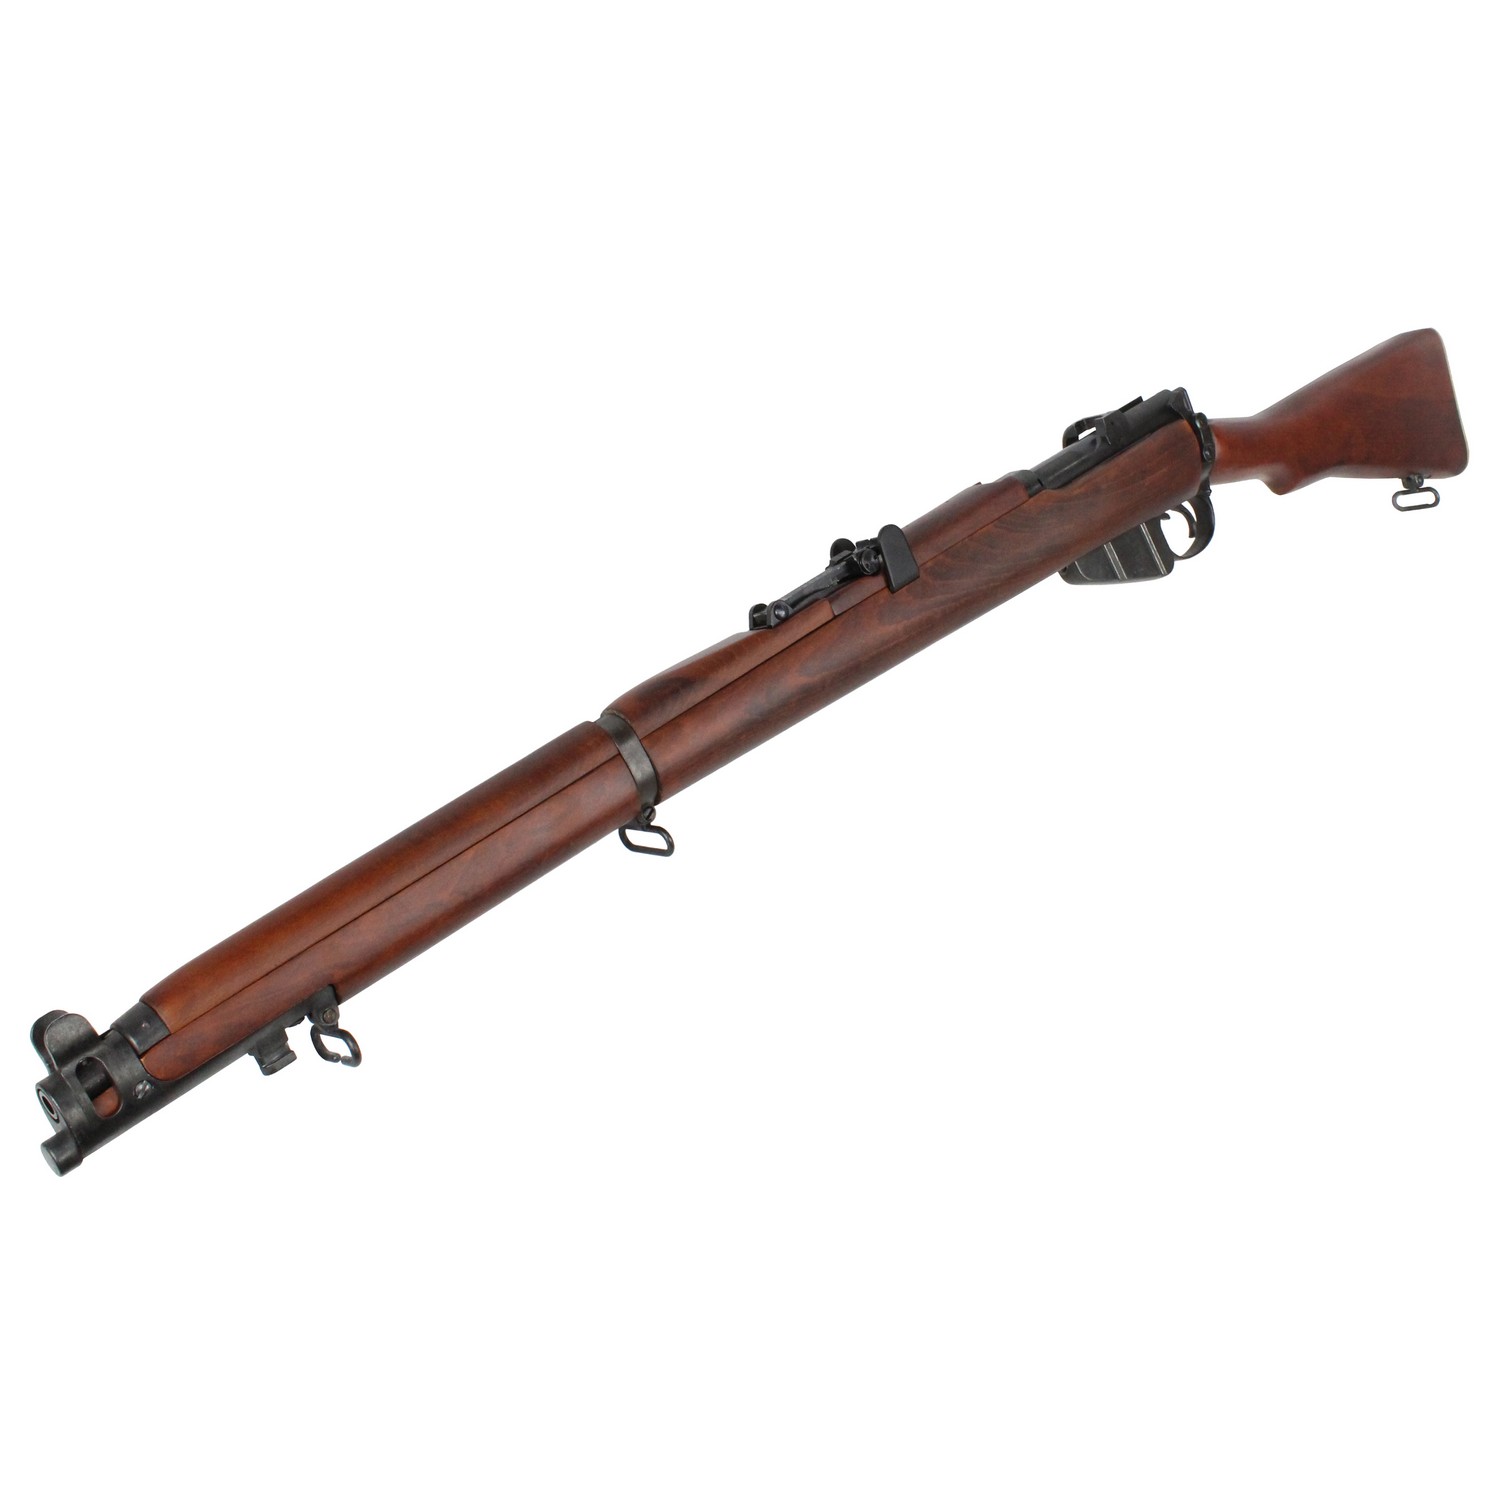 S&T Lee Enfield No. 1 Mk III* エアーコッキングライフル リアル 